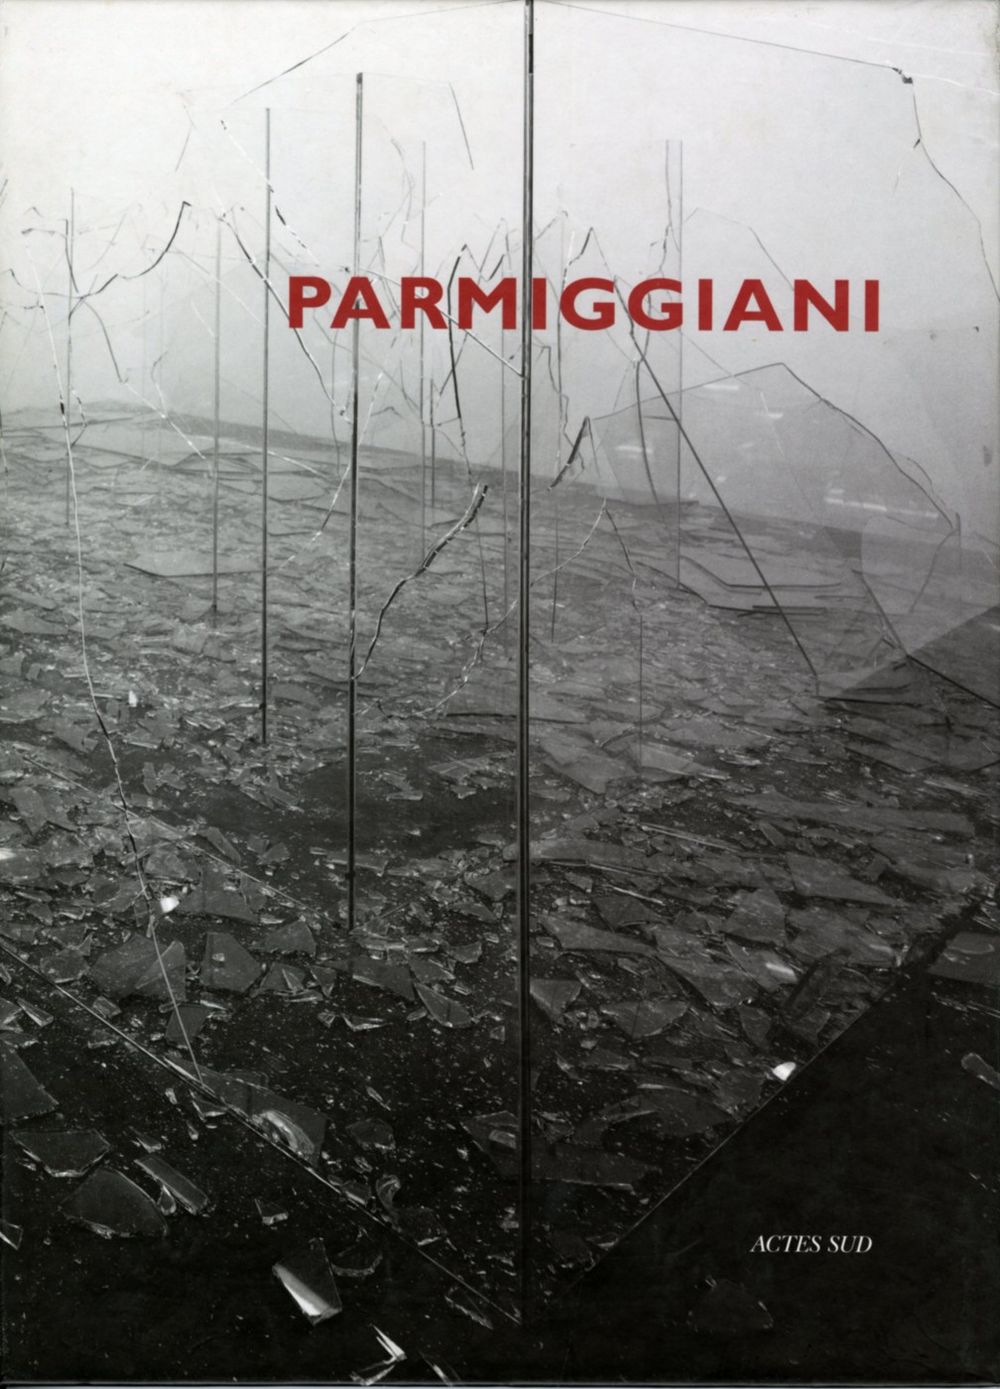 Book cover on plain gray background with title of Claudio Parmiggiani